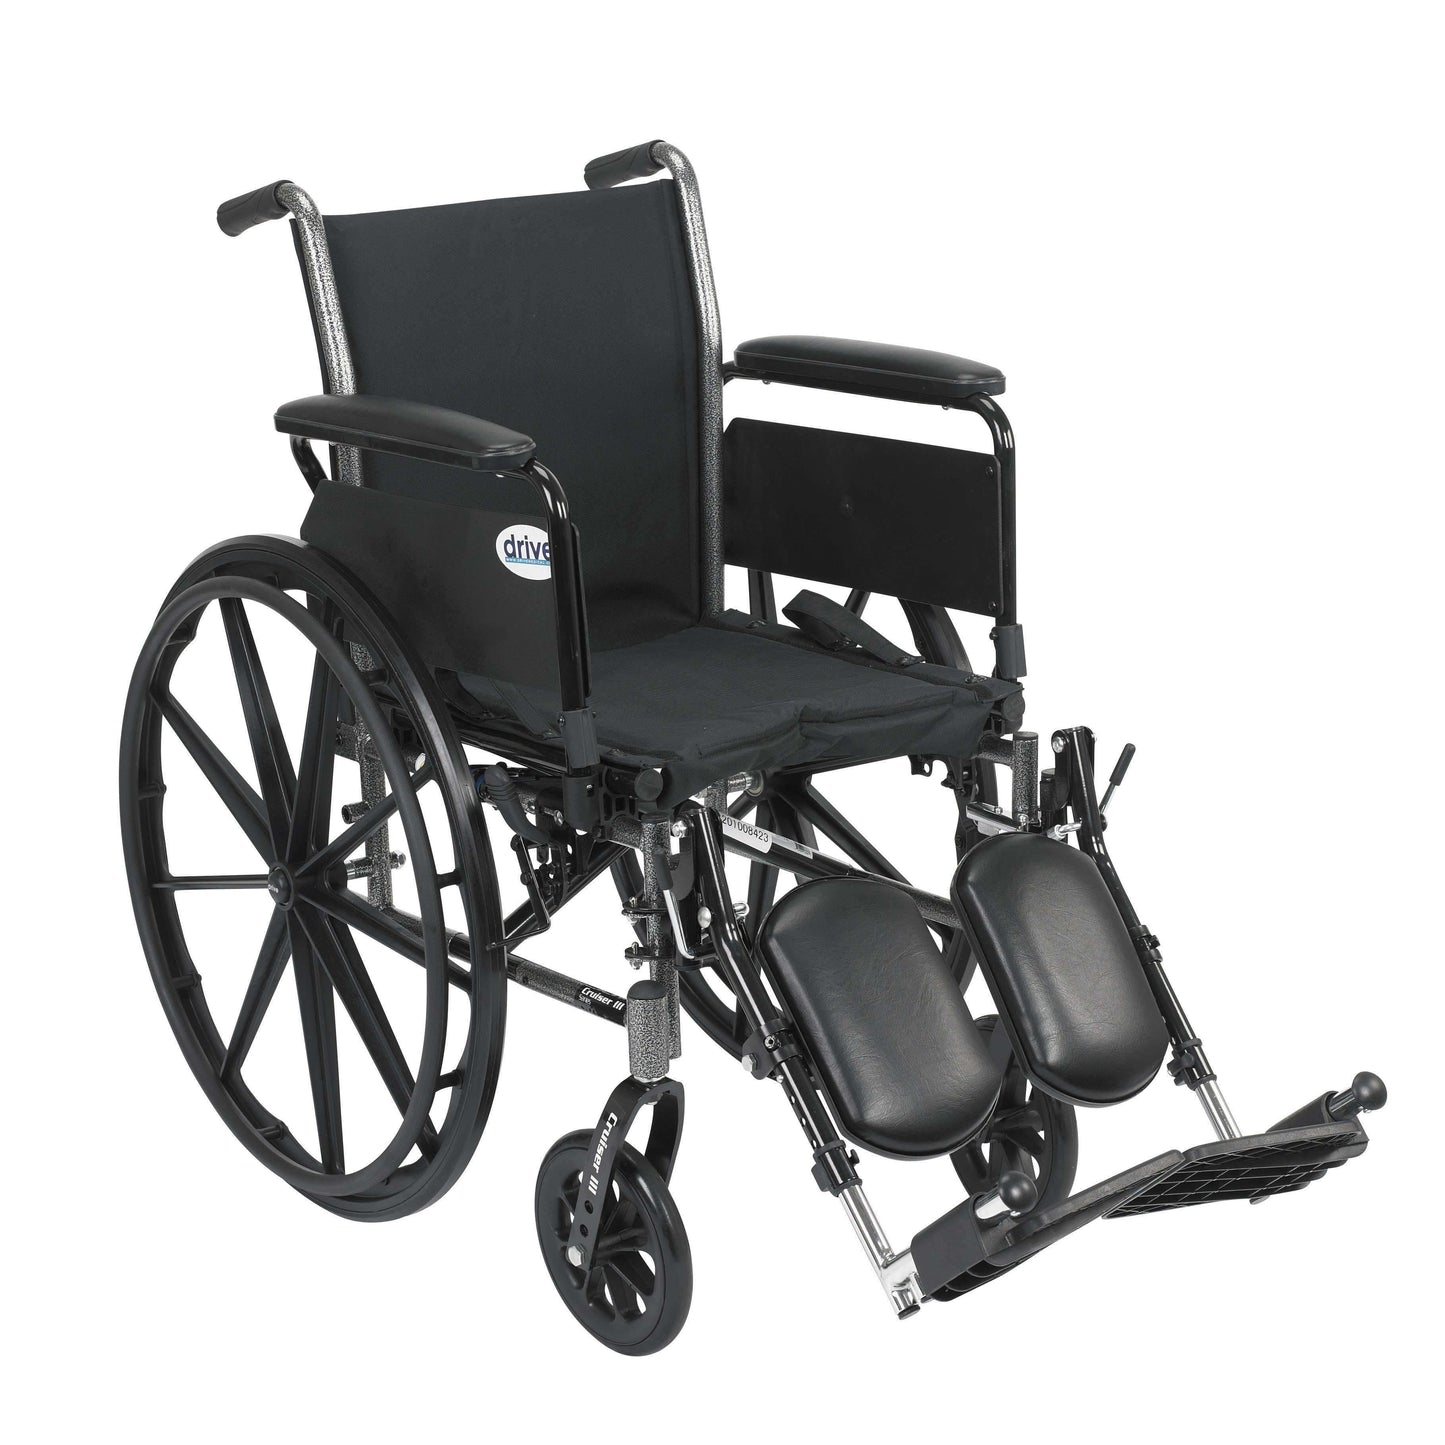 Drive k316dfa-elr Cruiser III Light Weight Wheelchair with Flip Back Removable Arms, Full Arms, Elevating Leg Rests, 16" Seat